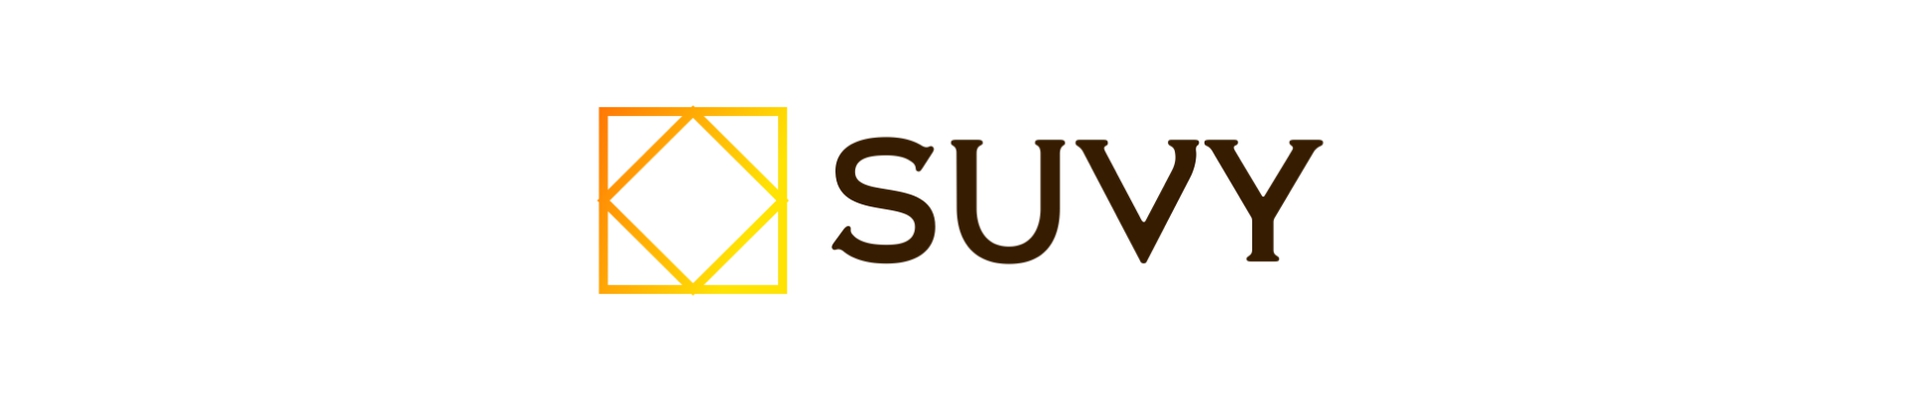 Largest trustworthy company SUVY MARKETING OÜ, reputation score 630, active business relations 1. Mainly operates in the field: Advertising agencies.